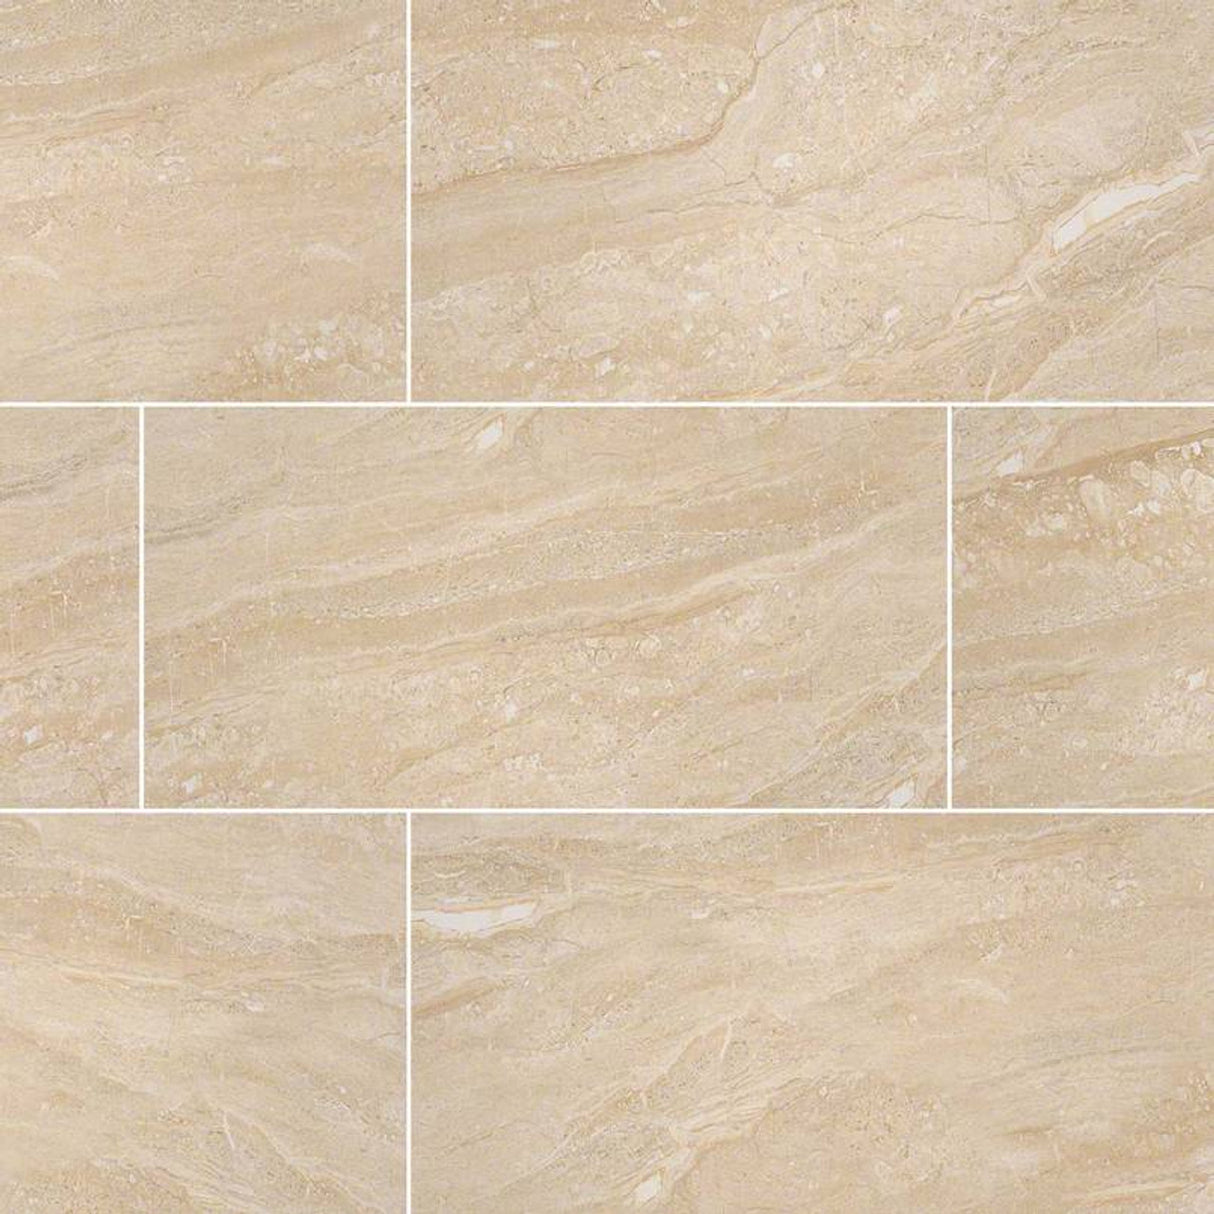 Aria Oro Polished Porcelain Floor and Wall Tiles - MSI Collection ARIA ORO POLISHED 12X24 (Case)